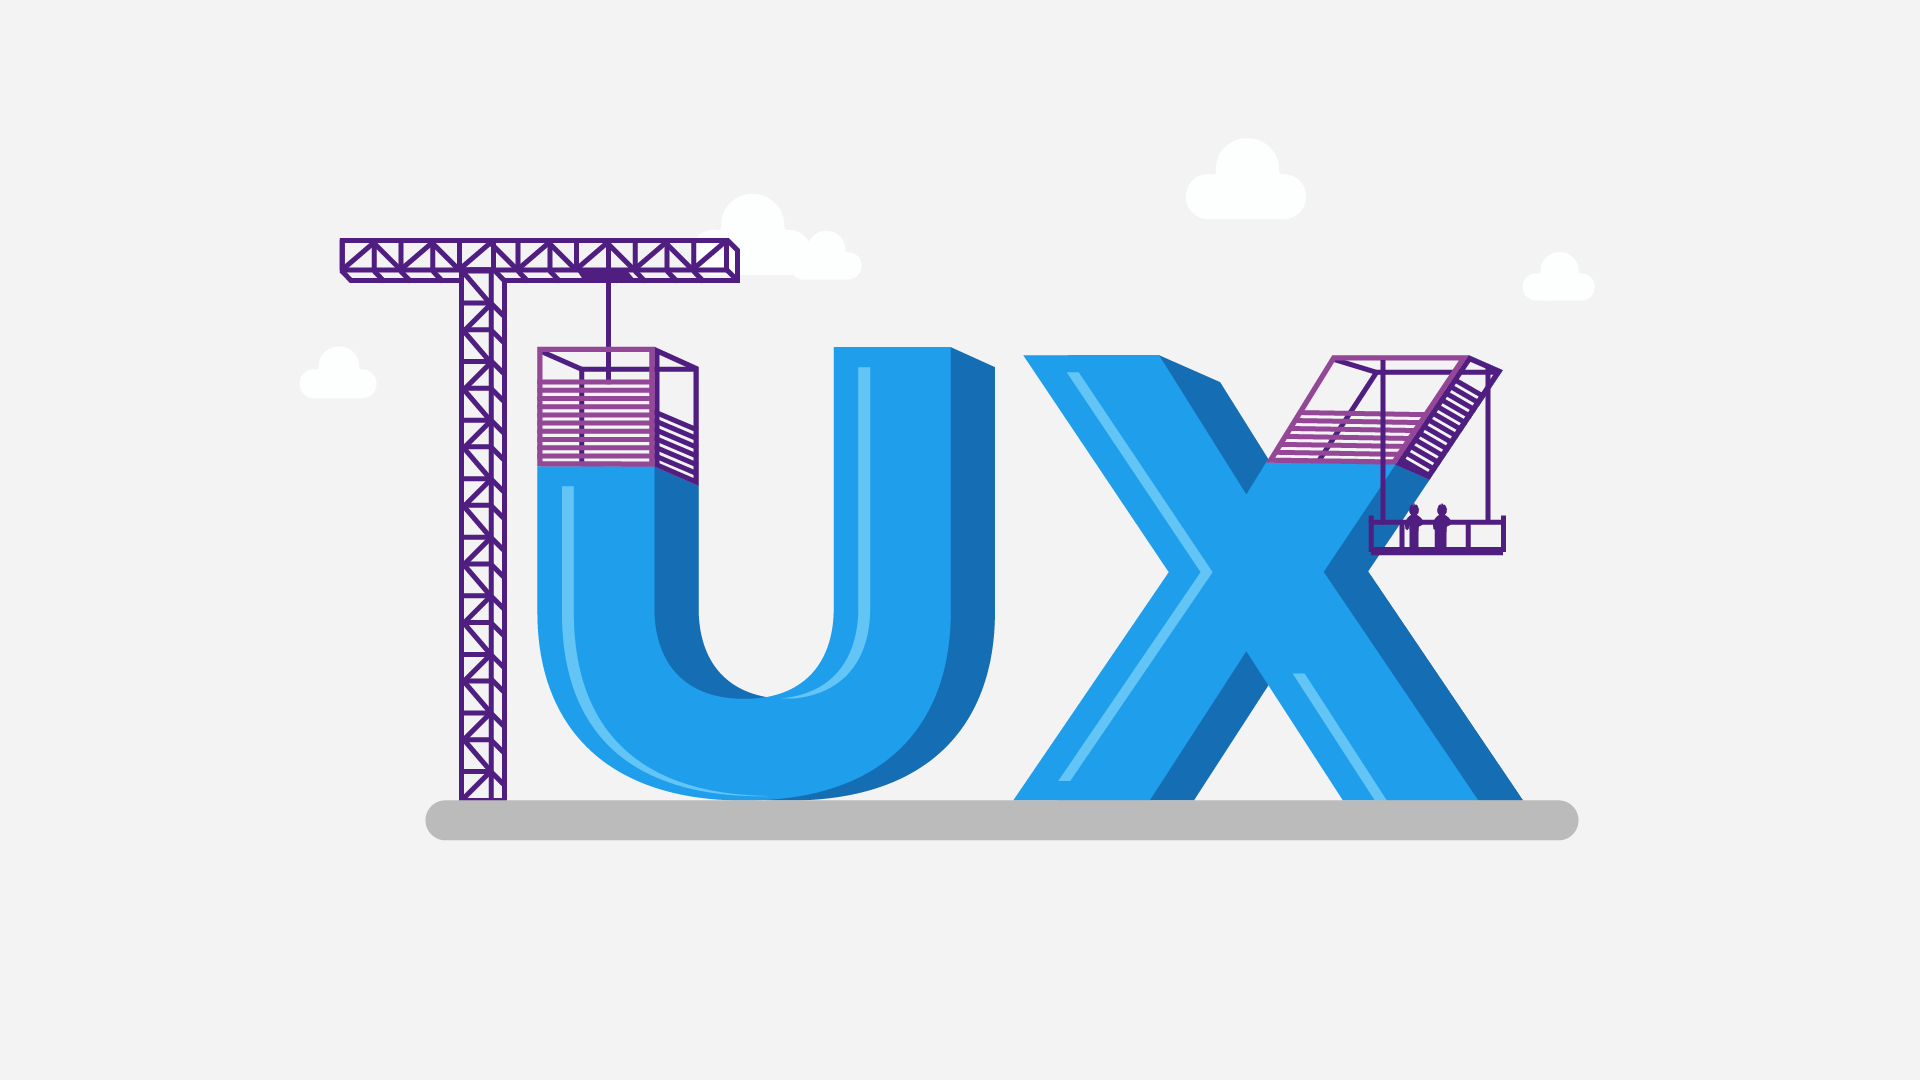 UX letters designed as a construction zone